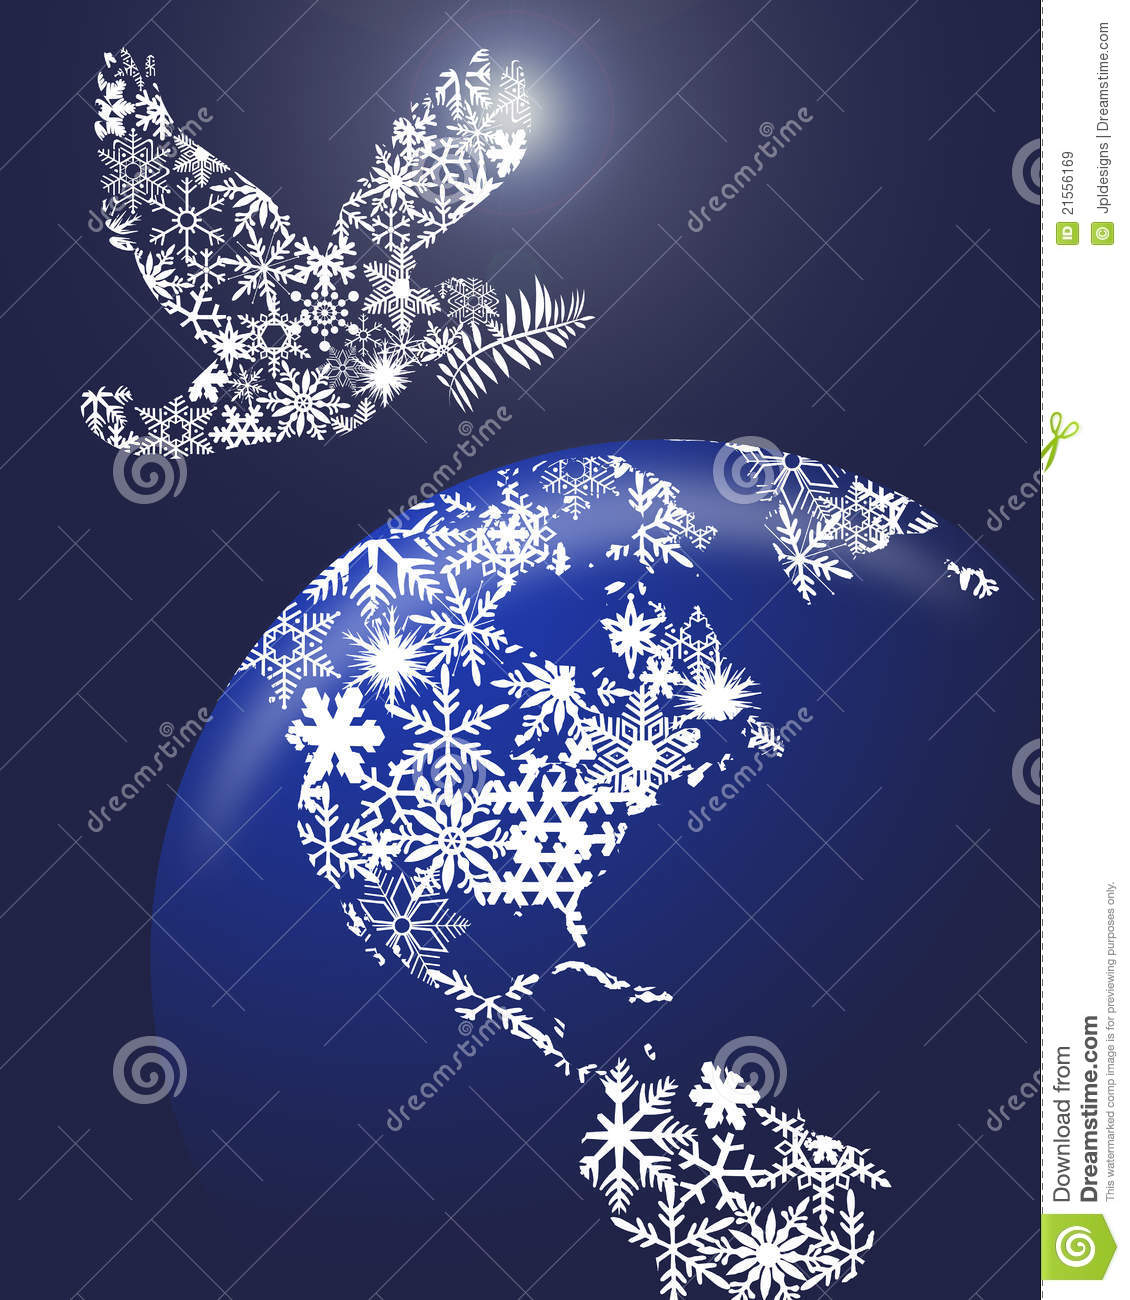 Christmas Peace Dove On Earth Royalty Free Stock Images   Image